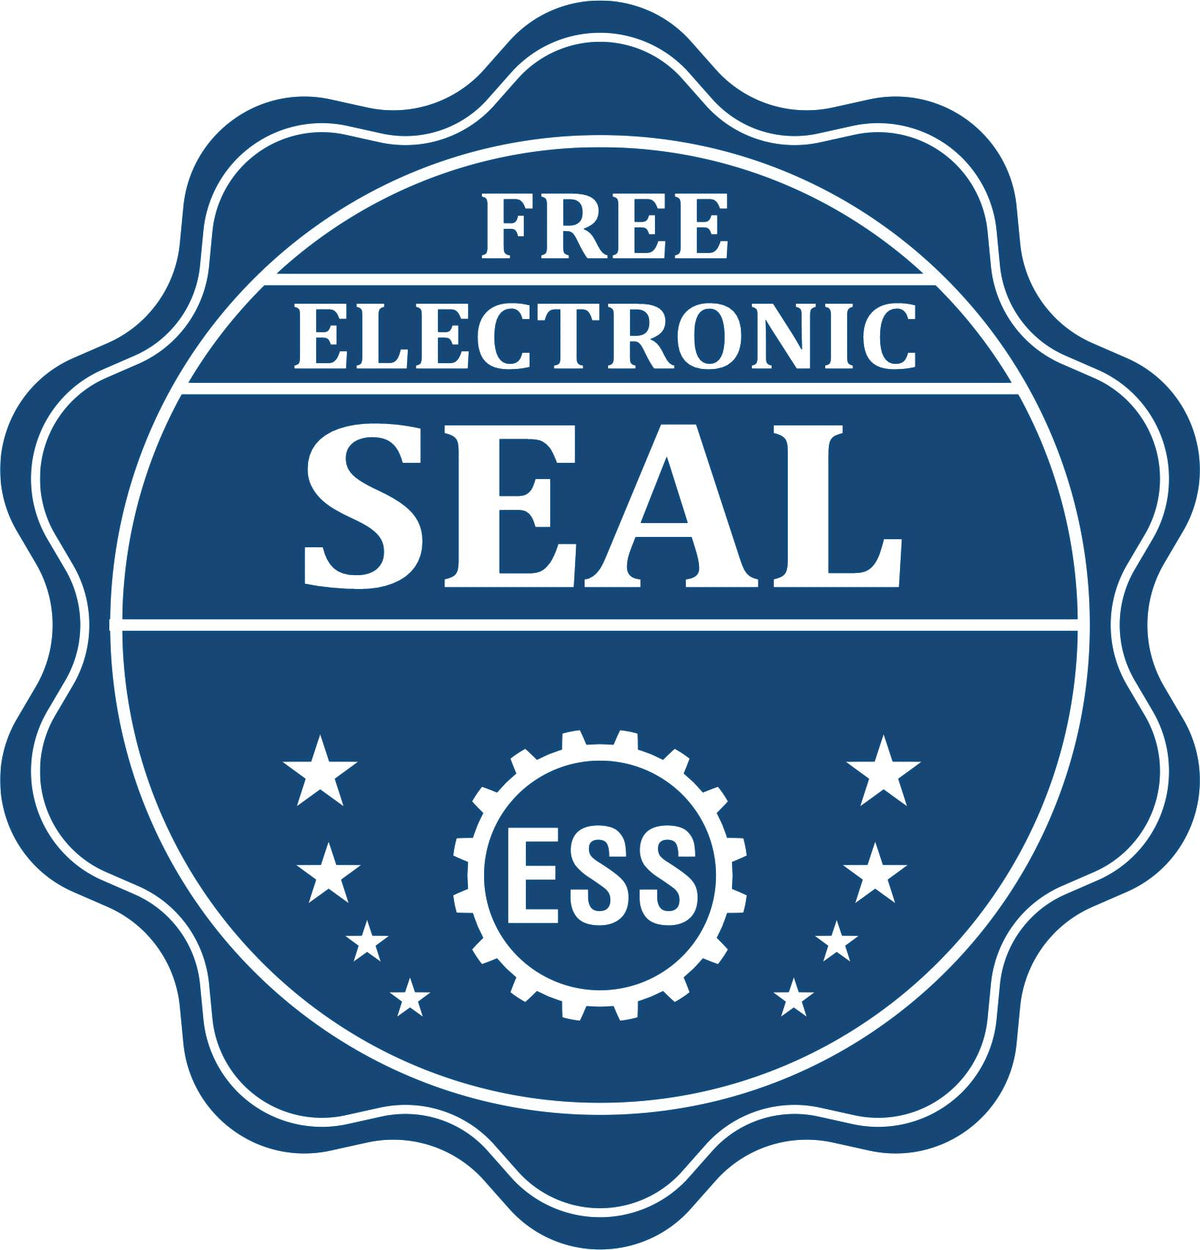 A badge showing a free electronic seal for the Gift Arizona Engineer Seal with stars and the ESS gear on the emblem.